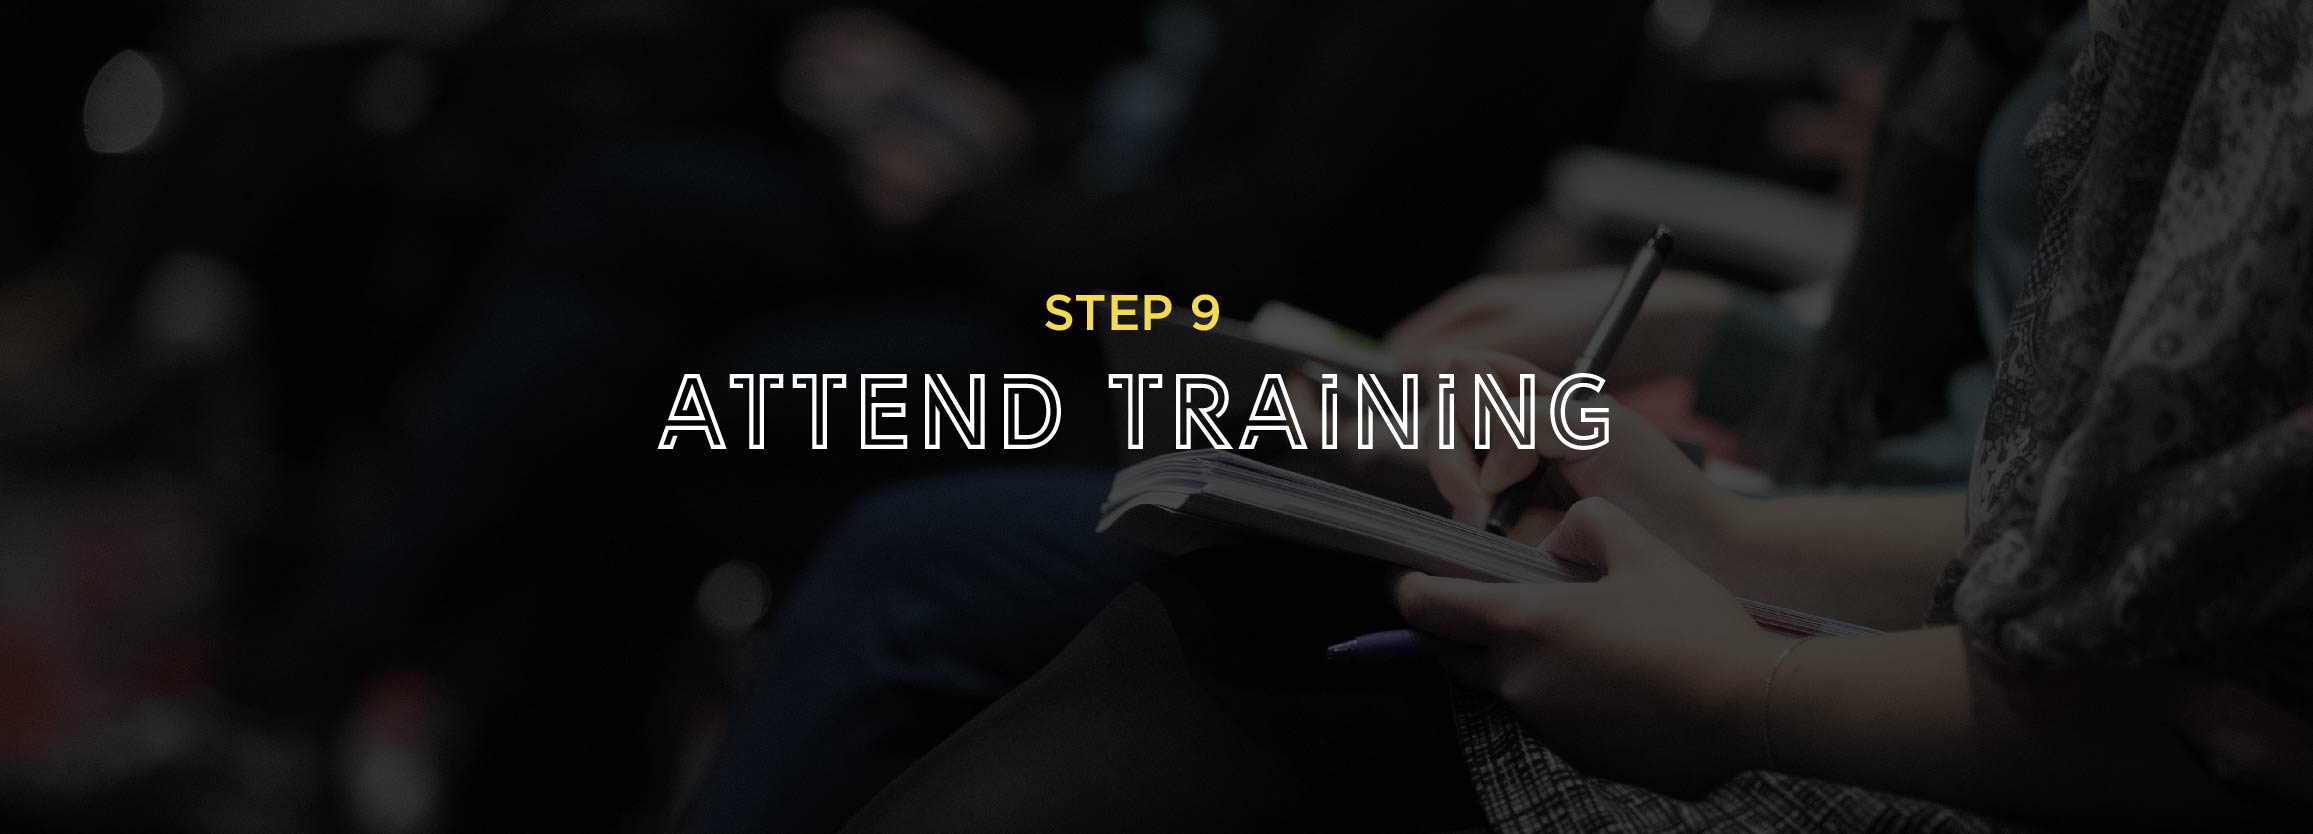 Step 9 - Attend training